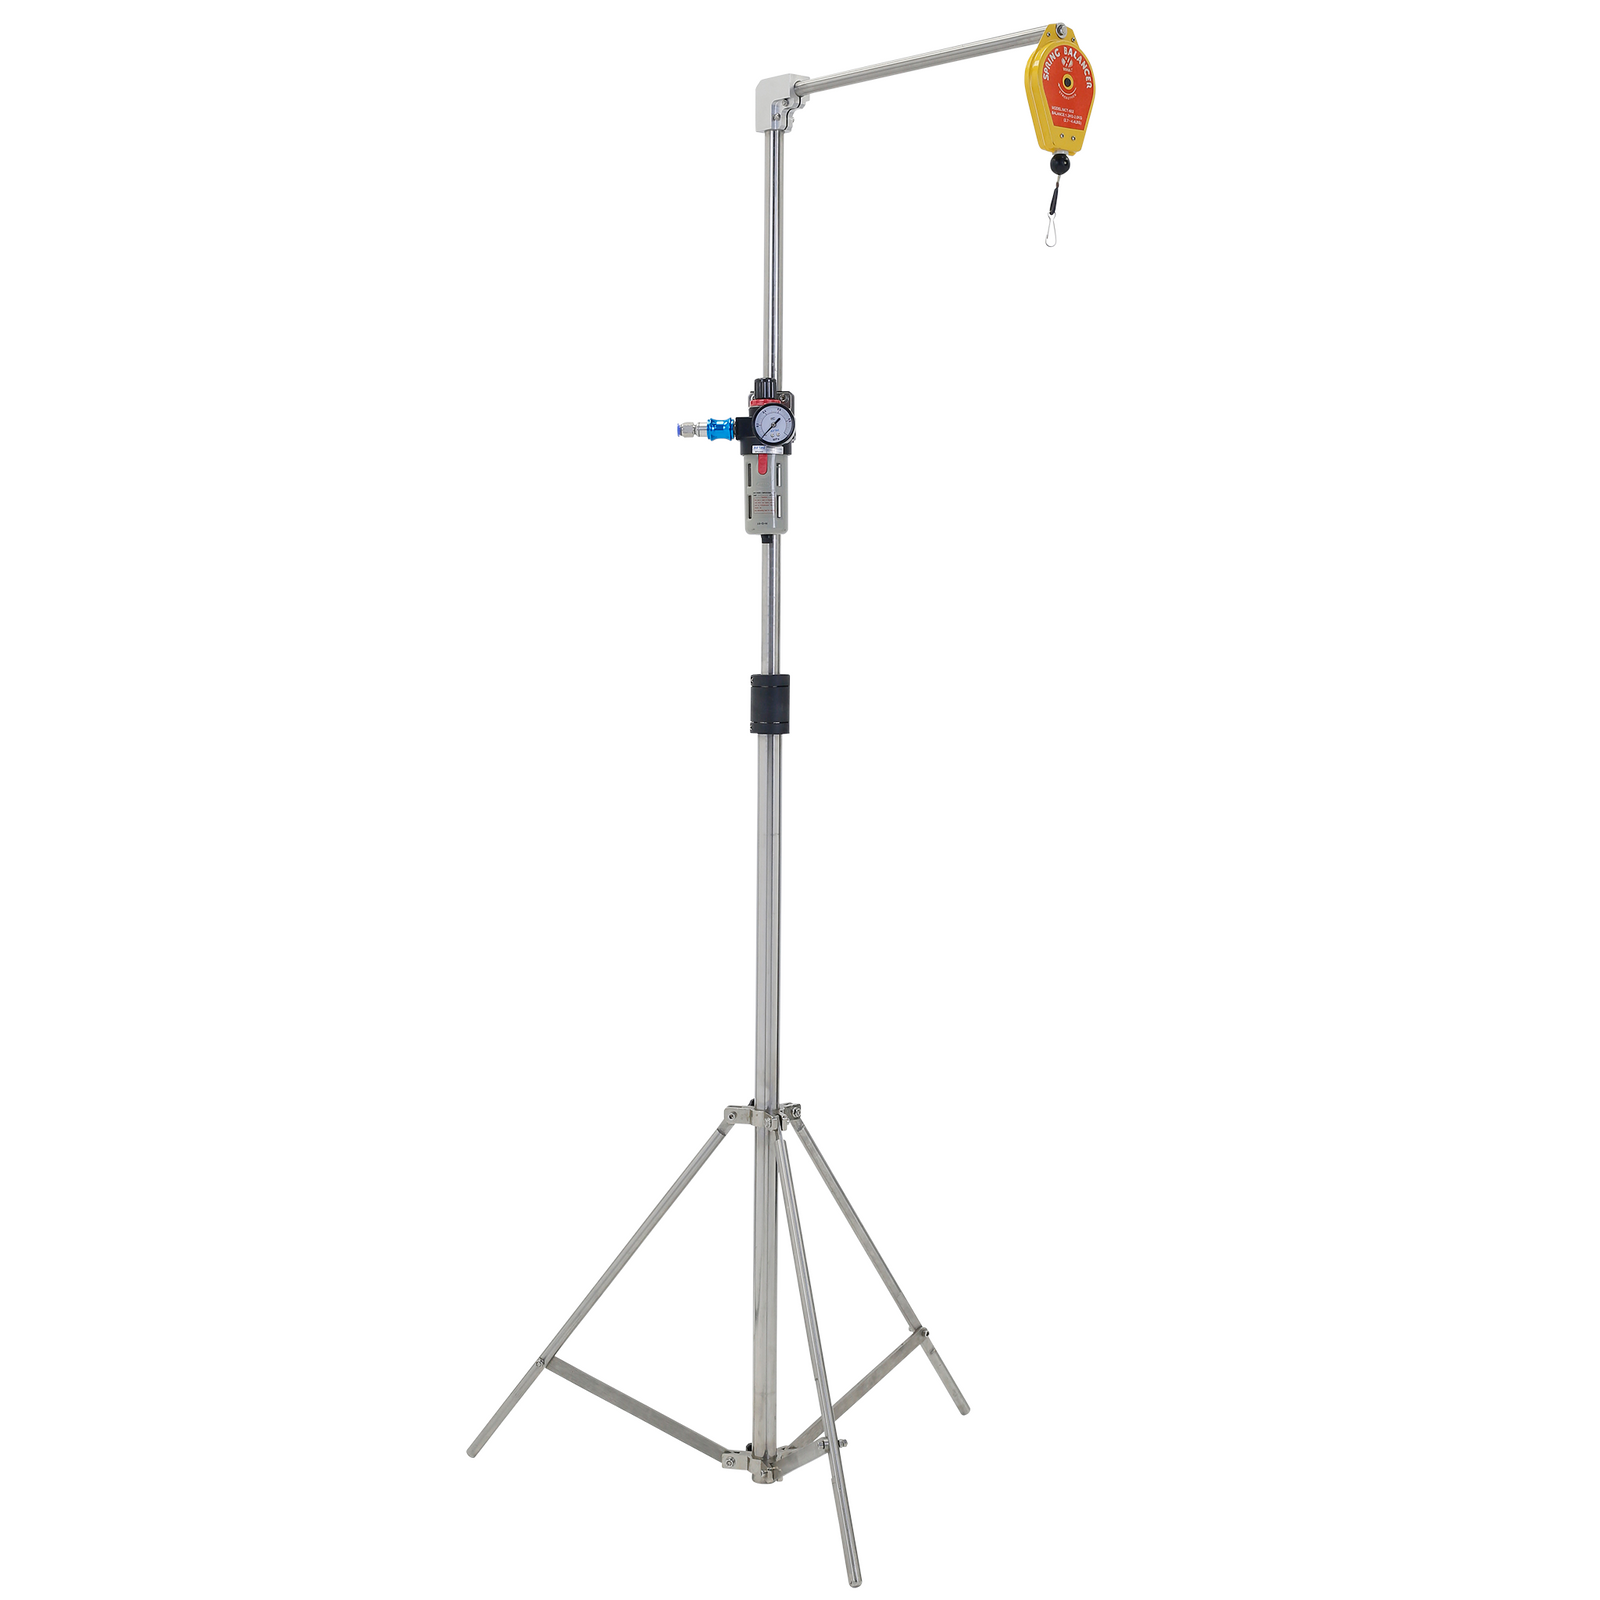 stainless steel tripod with yellow spring balancer and black gauge